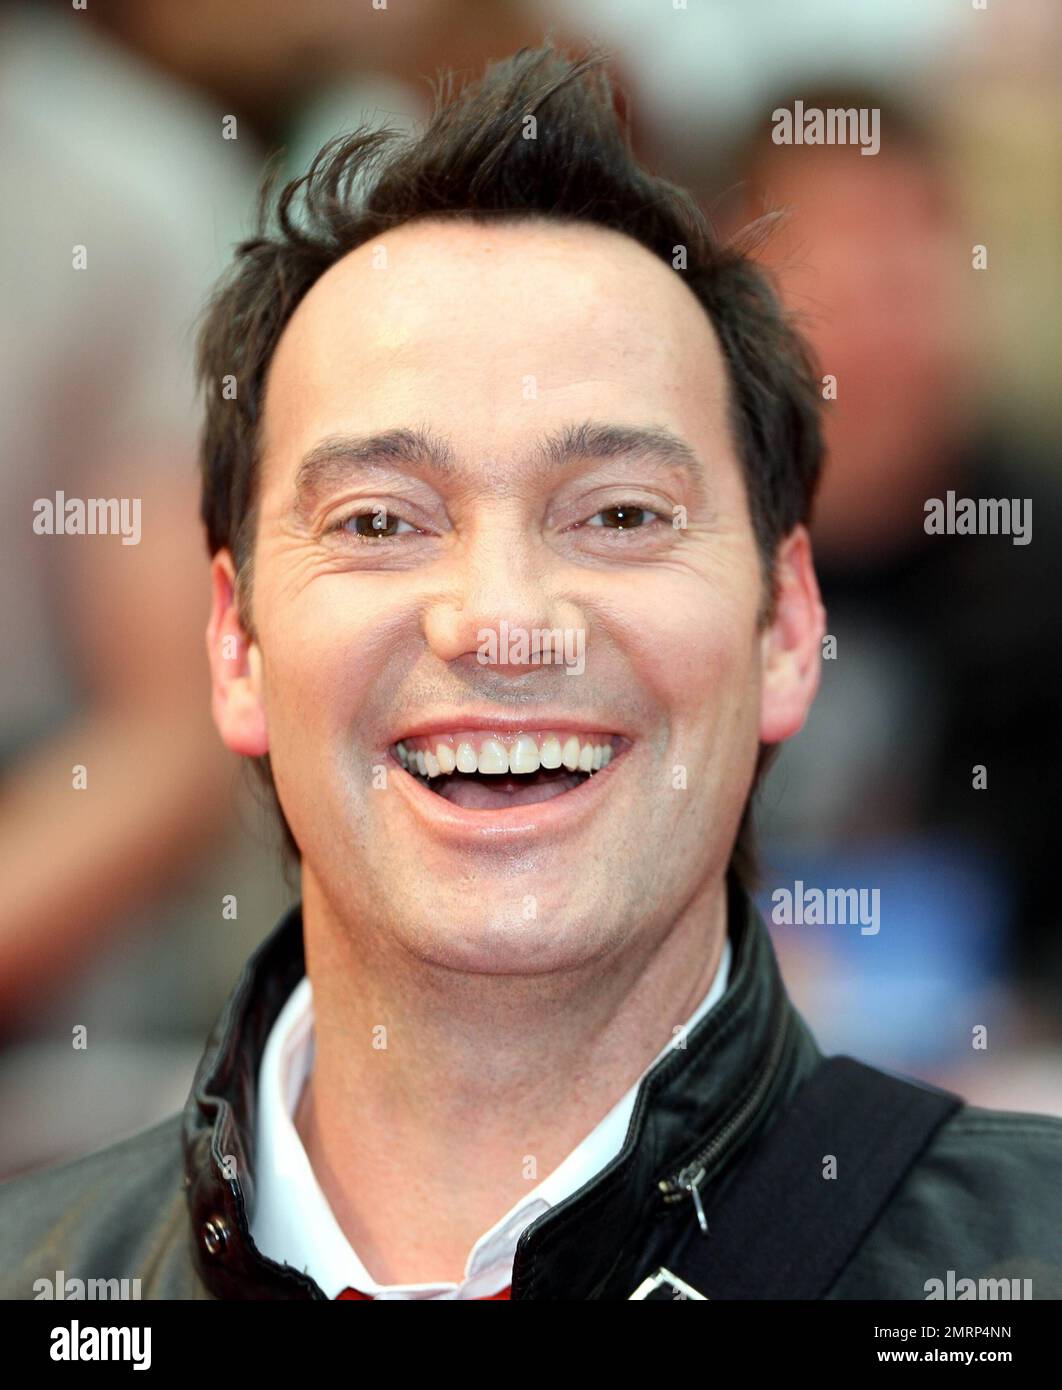 Craig Revel Horwood at the UK premiere of 'Larry Crowne' at the Westfield Vue. London, UK. 6/6/11. Stock Photo